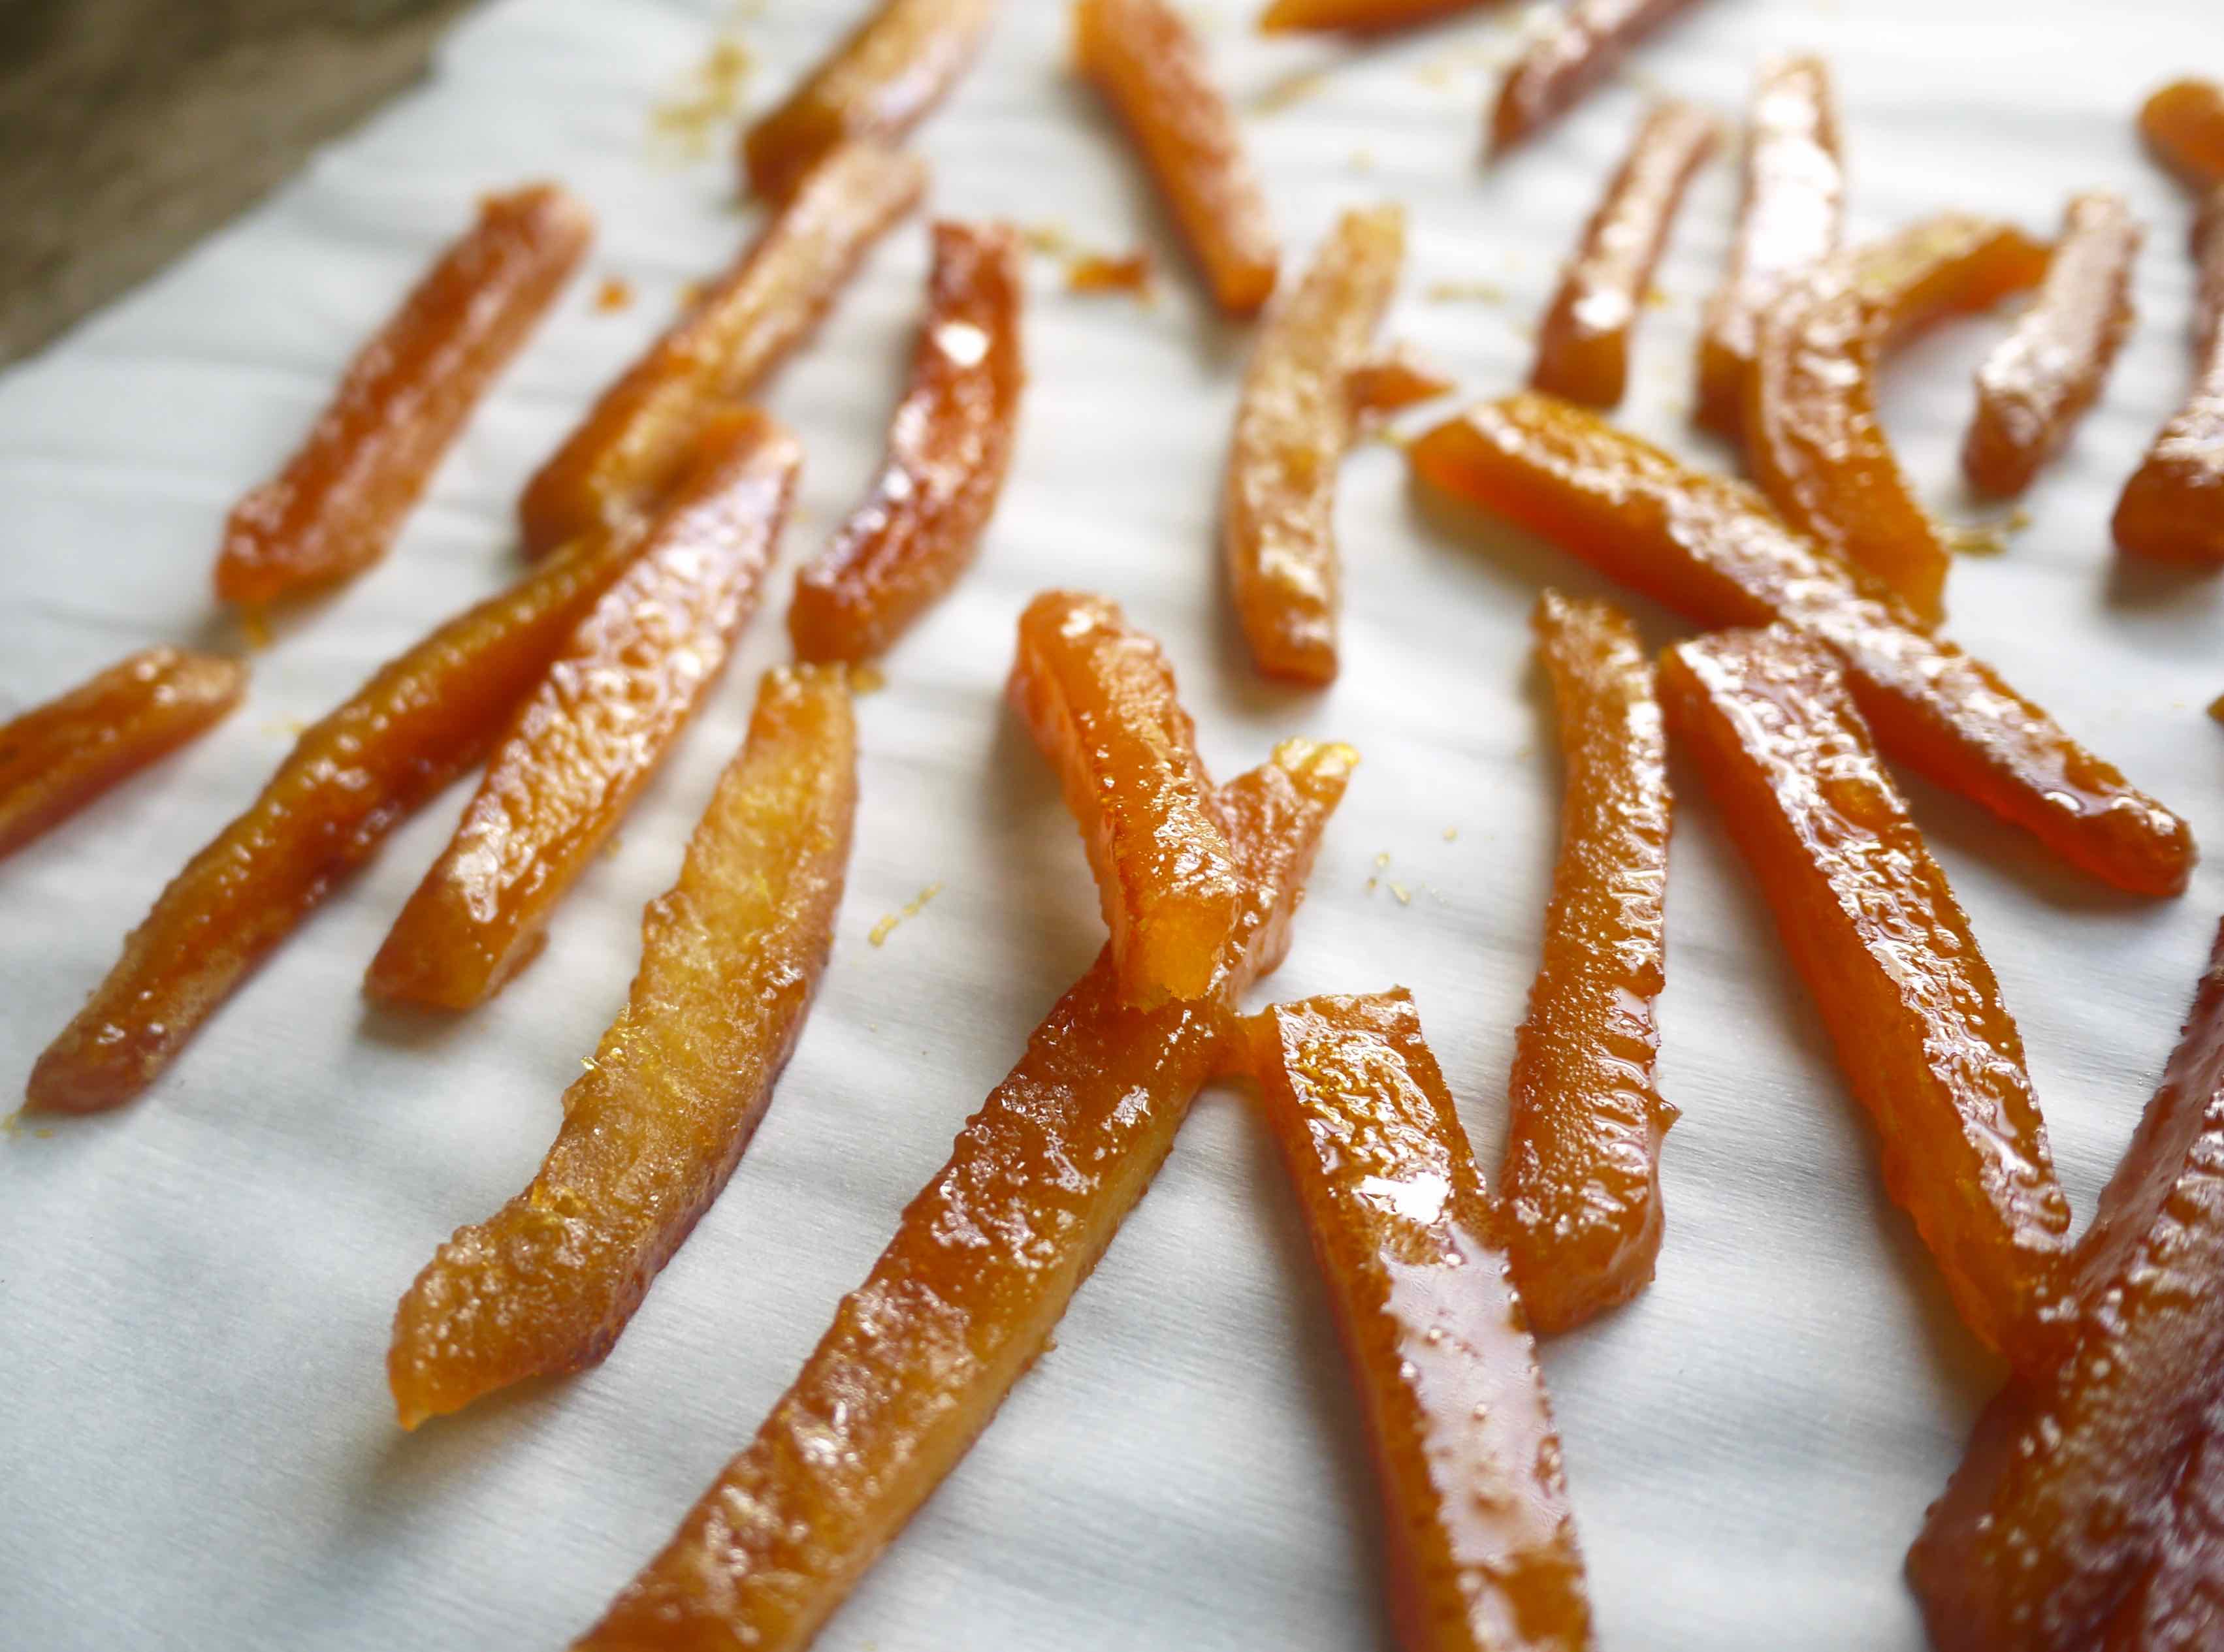 Freshly candied orange peels drying on parchment paper.